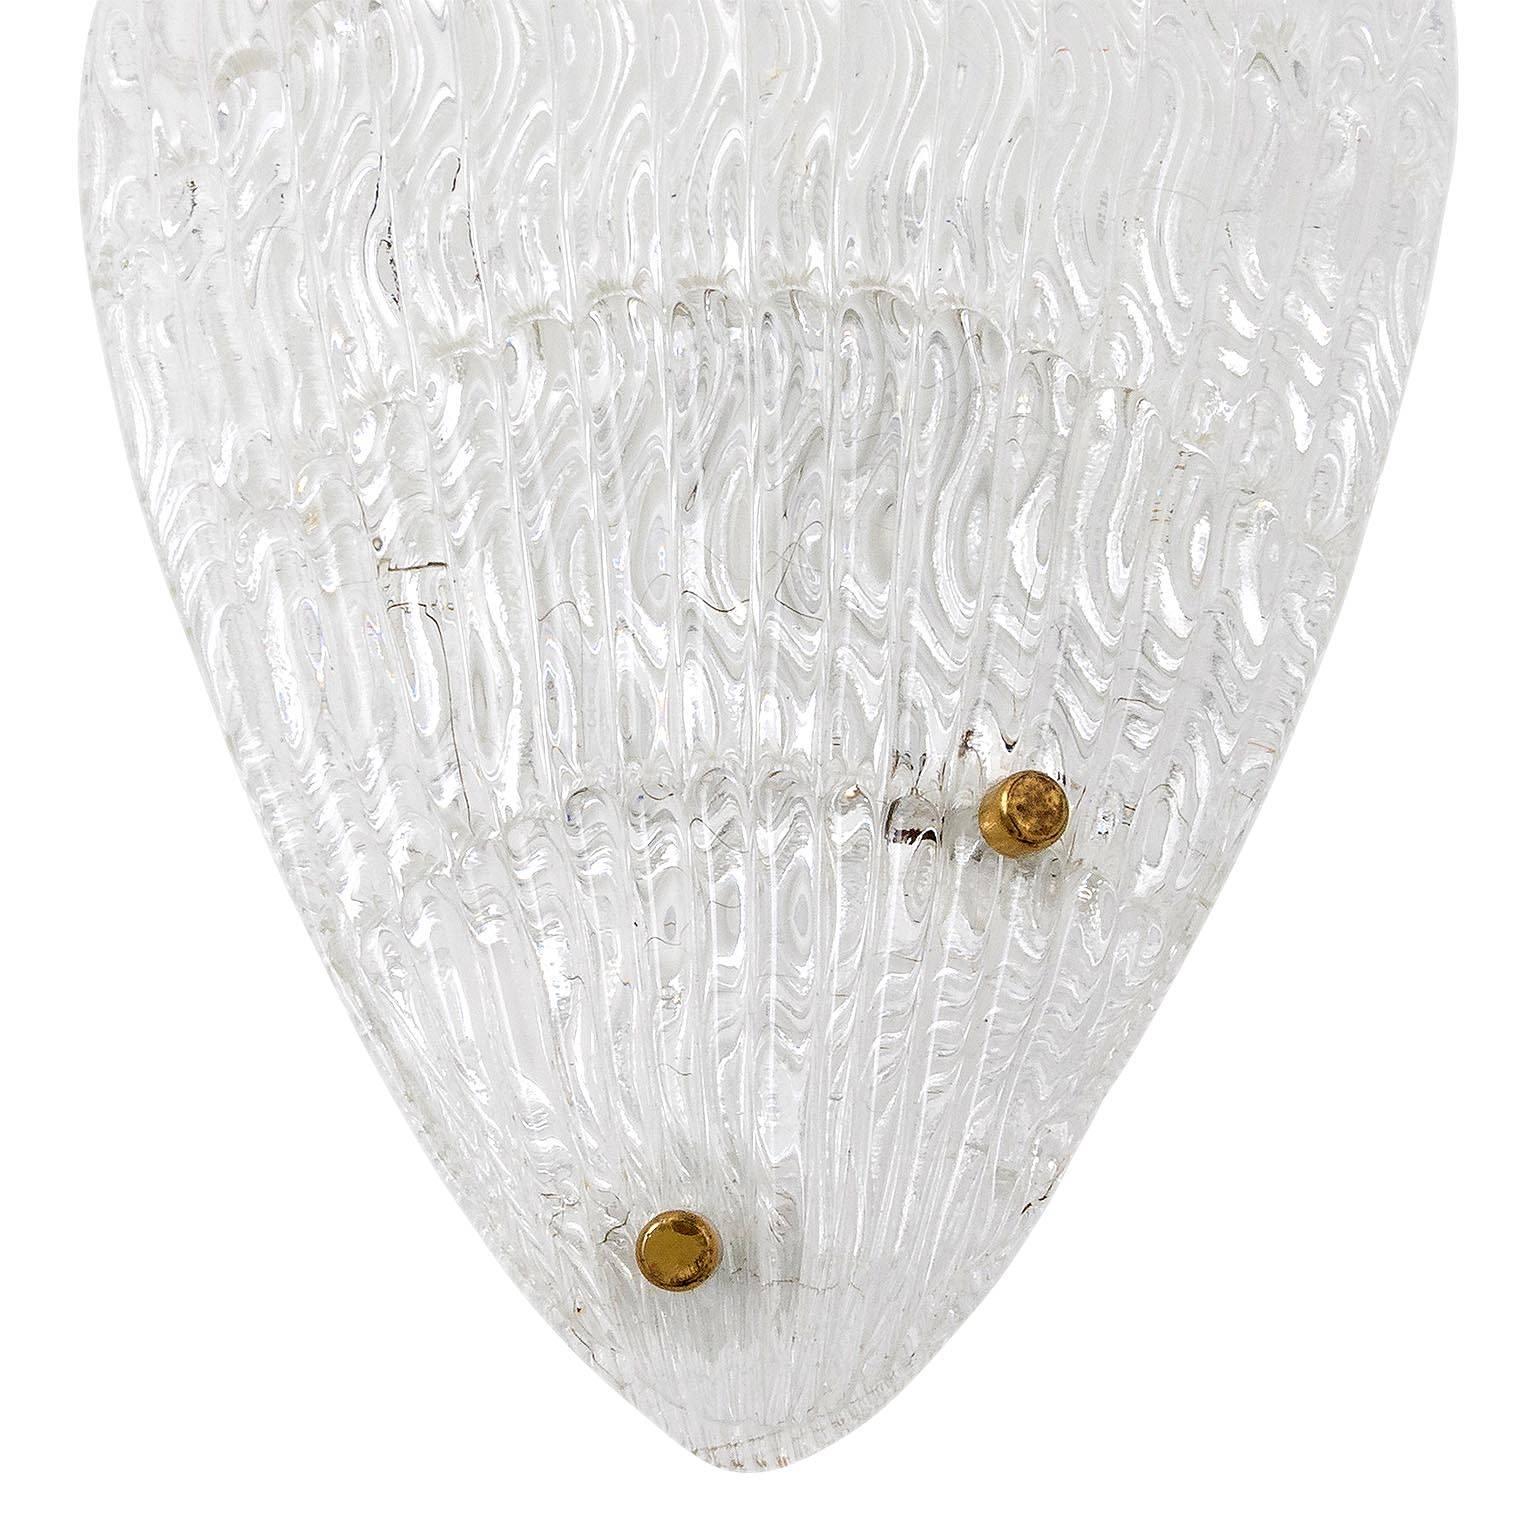 1 of 3 Shell Textured Glass Sconces Wall Lights by Rupert Nikoll, Vienna, 1950s For Sale 3